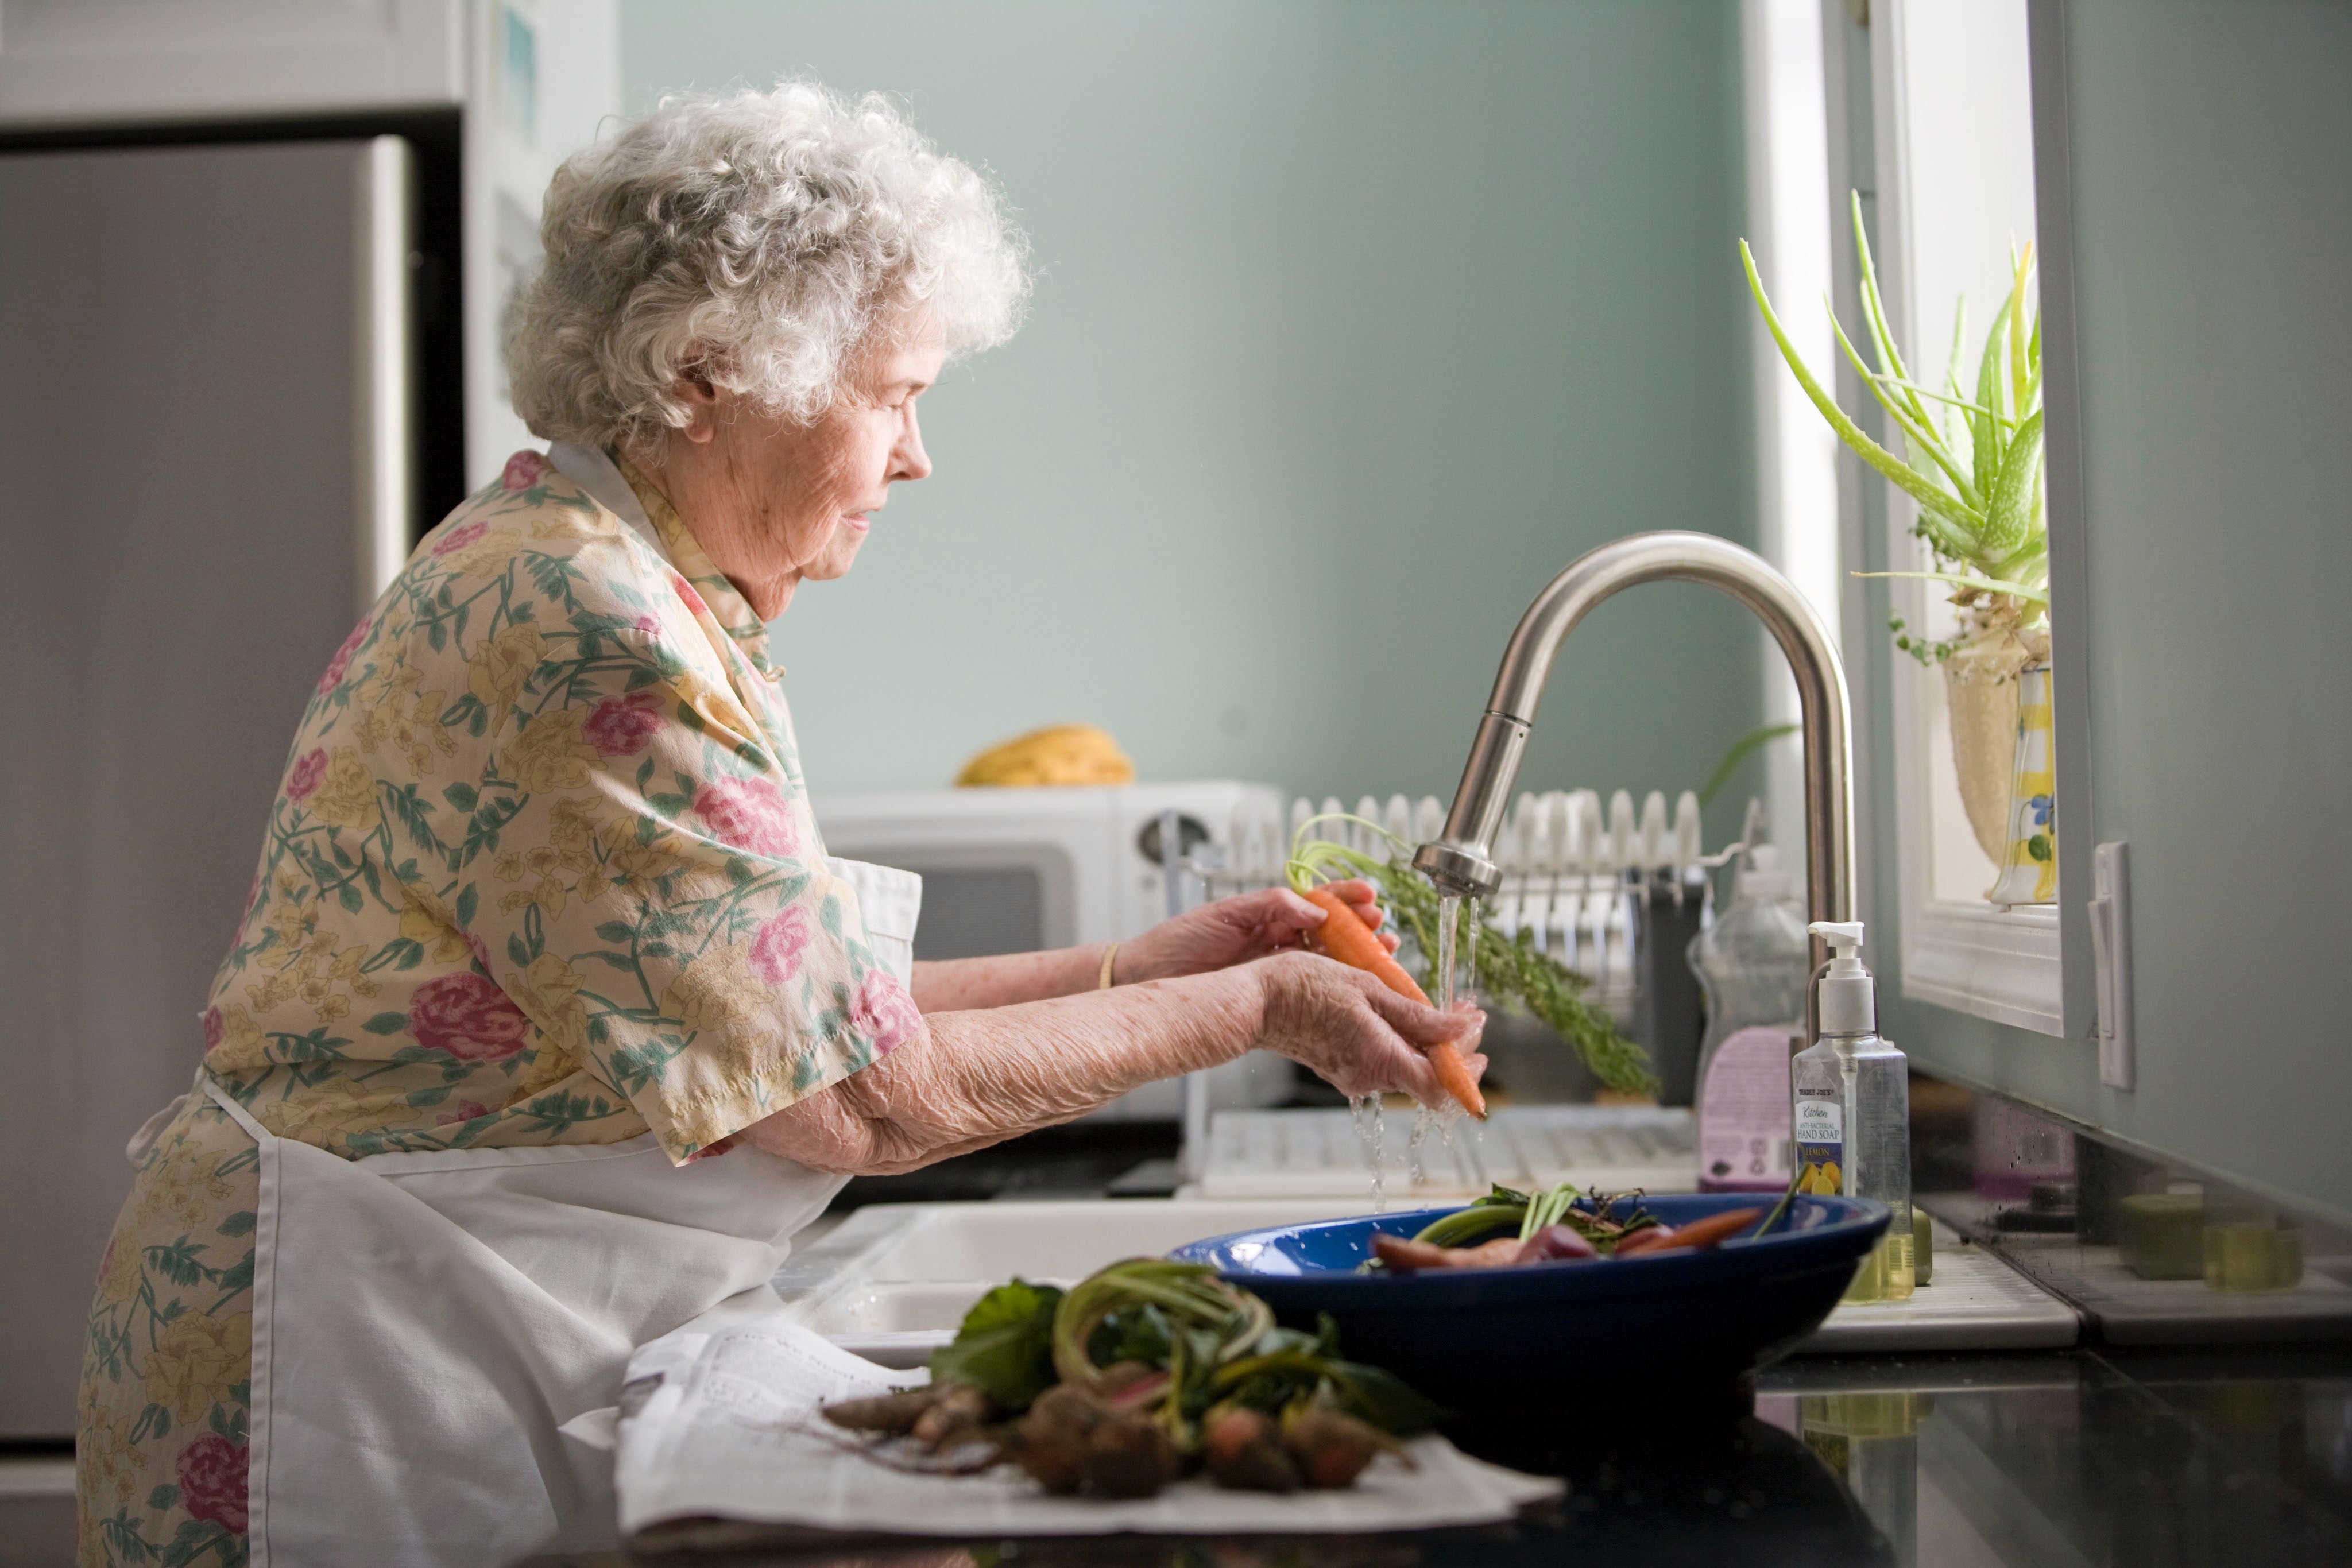 woman-at-sink-cleaning-vegetables